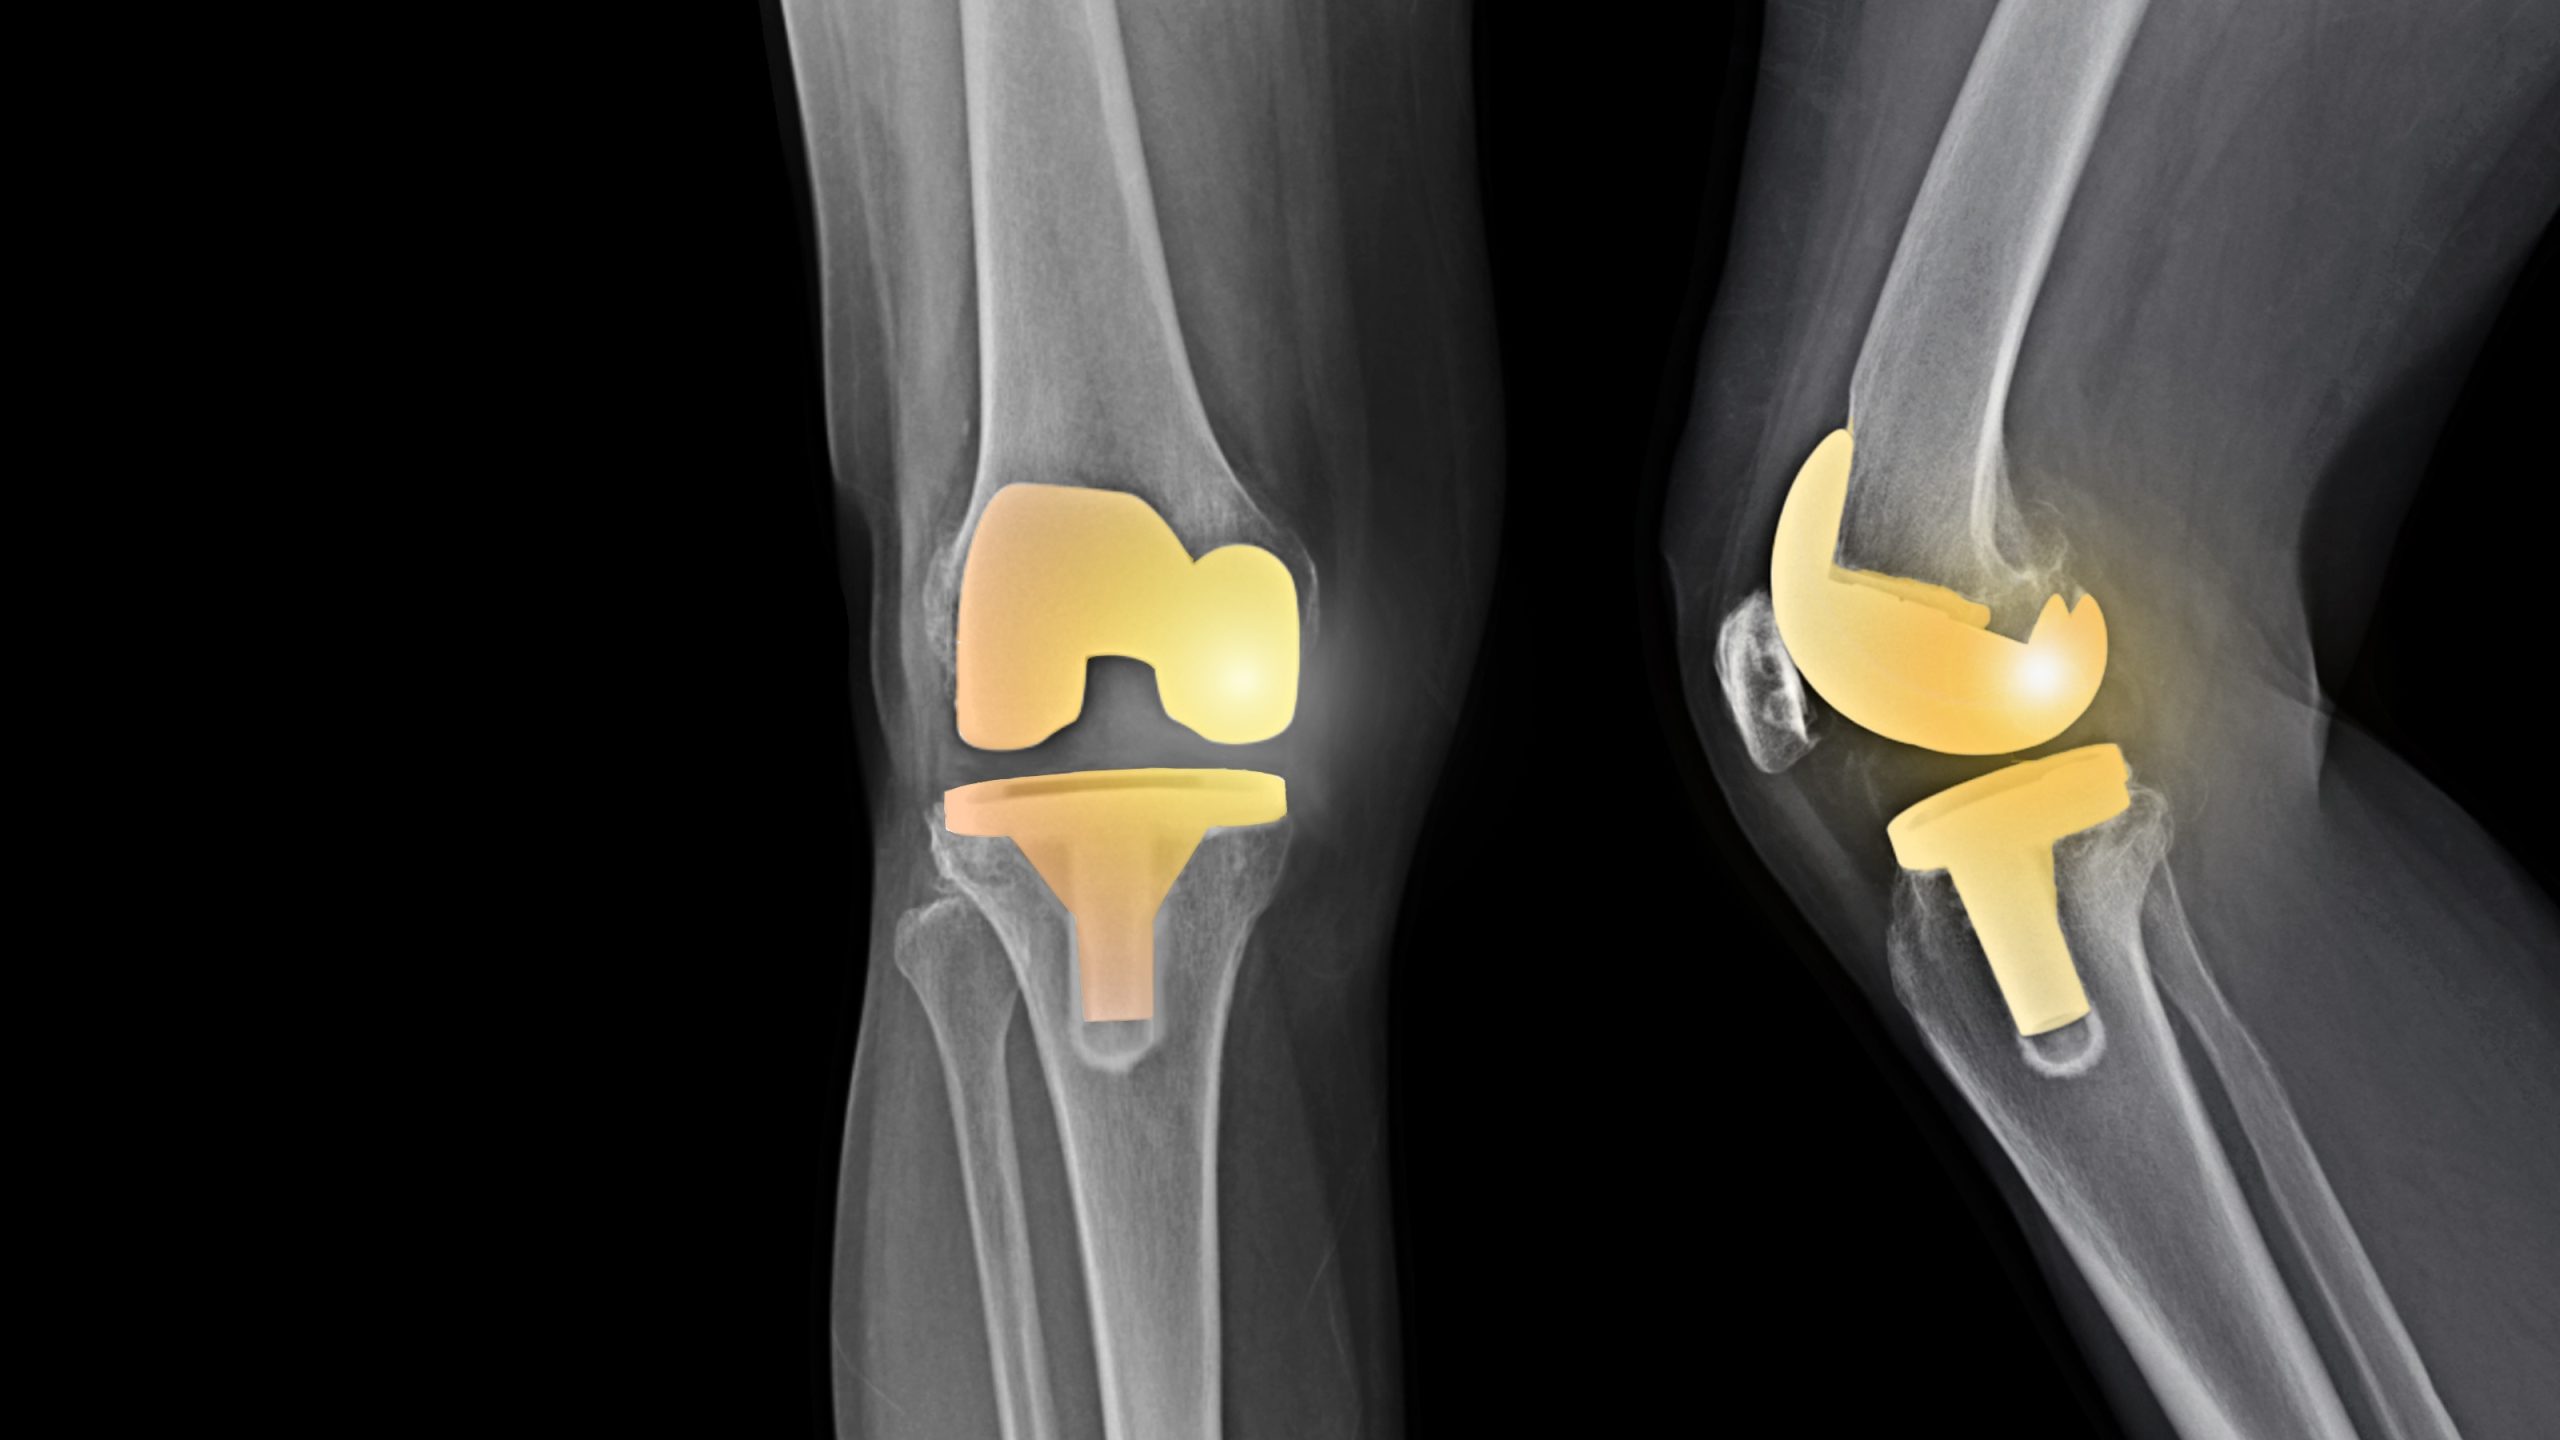 Hip & Knee Replacement Device Company Issues Class II Recall